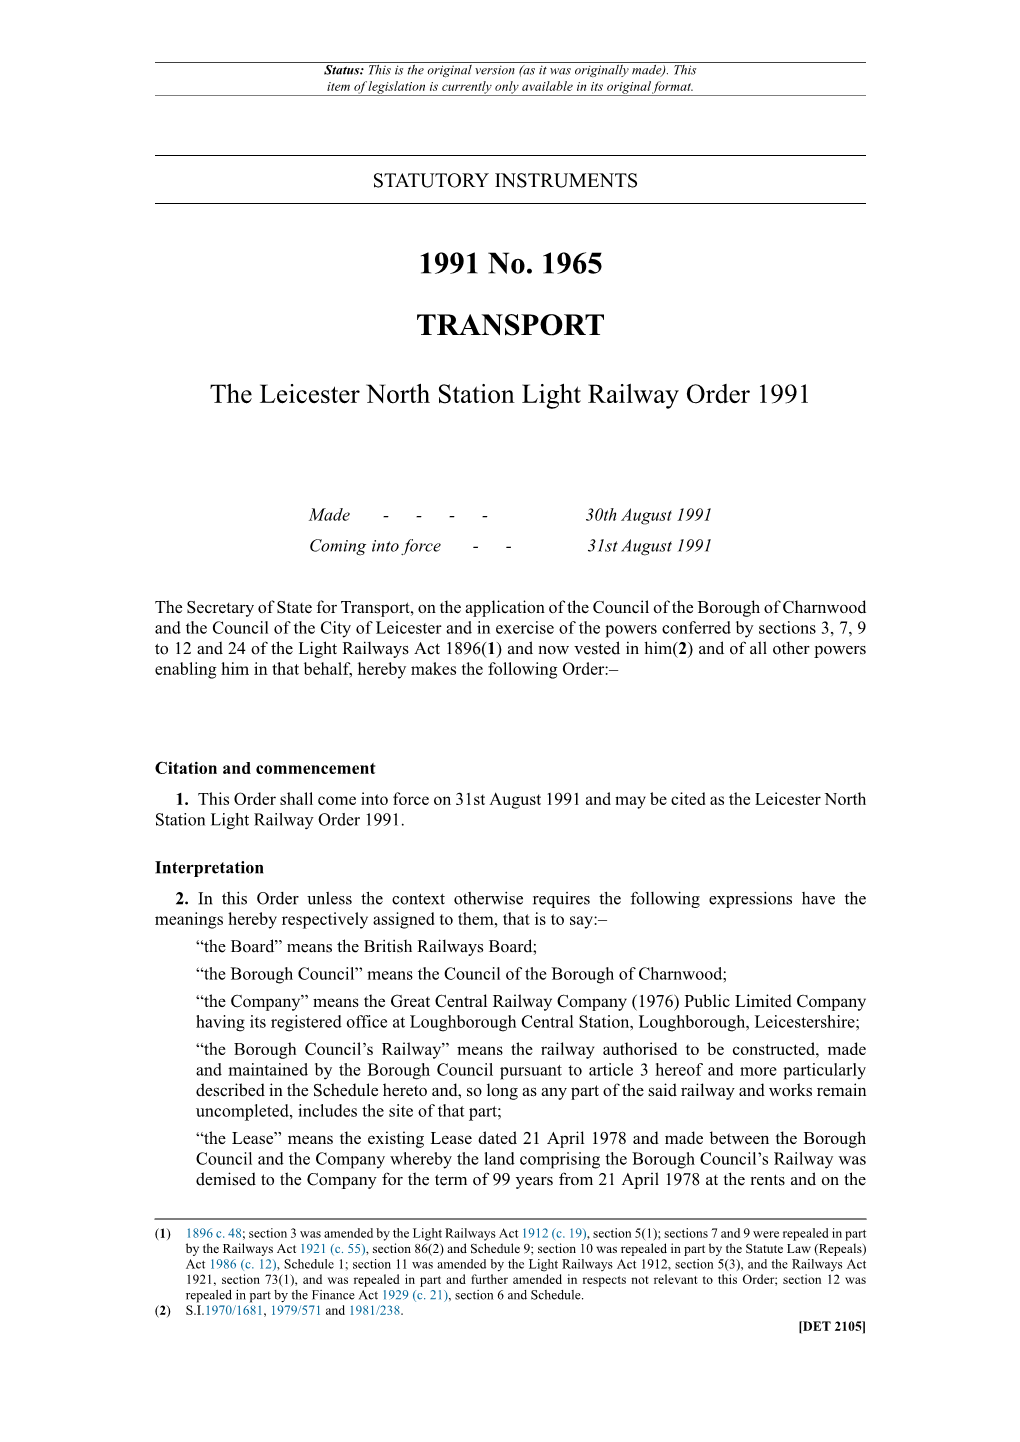 The Leicester North Station Light Railway Order 1991